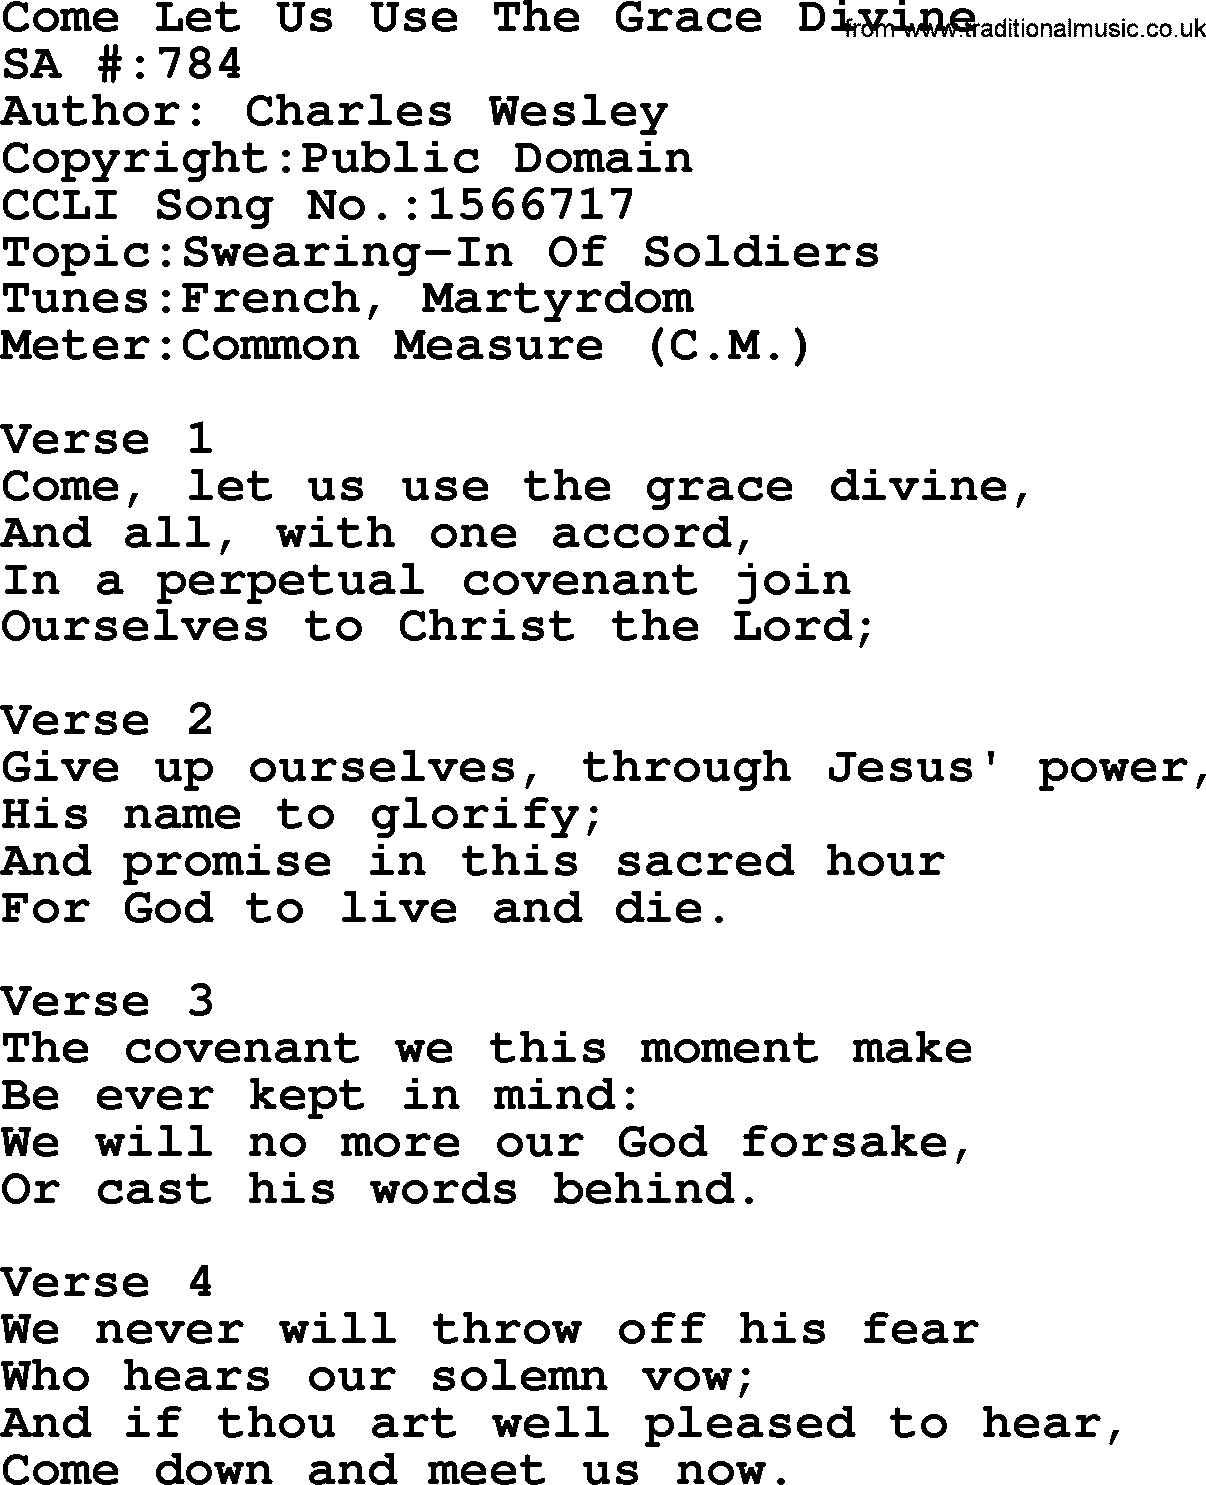 Salvation Army Hymnal, title: Come Let Us Use The Grace Divine, with lyrics and PDF,